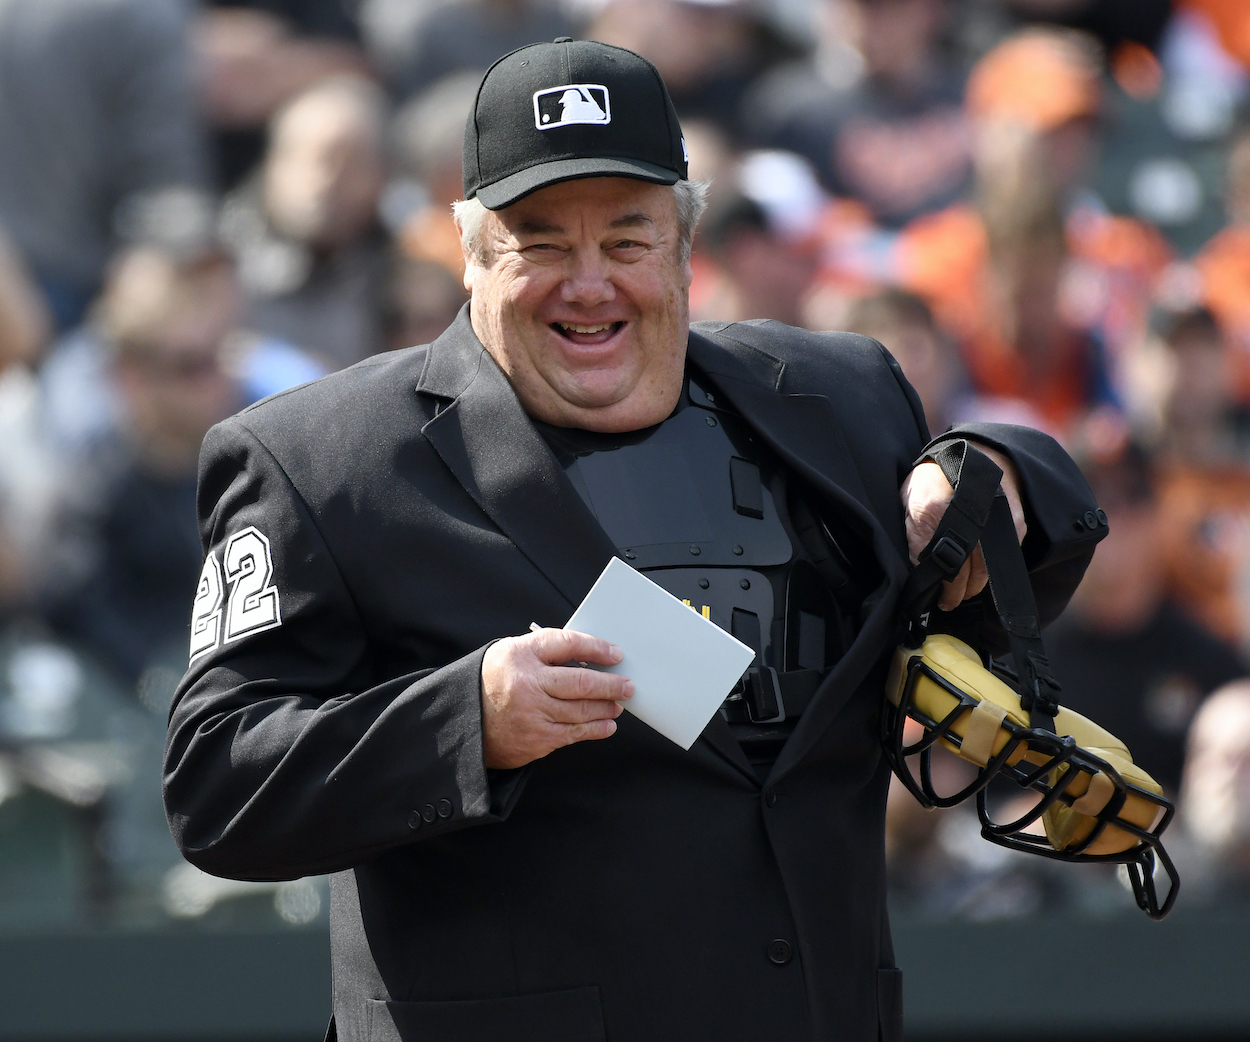 Famed MLB umpire Joe West was just awarded $500,000 in a defamation lawsuit against former New York Mets catcher Paul Lo Duca.